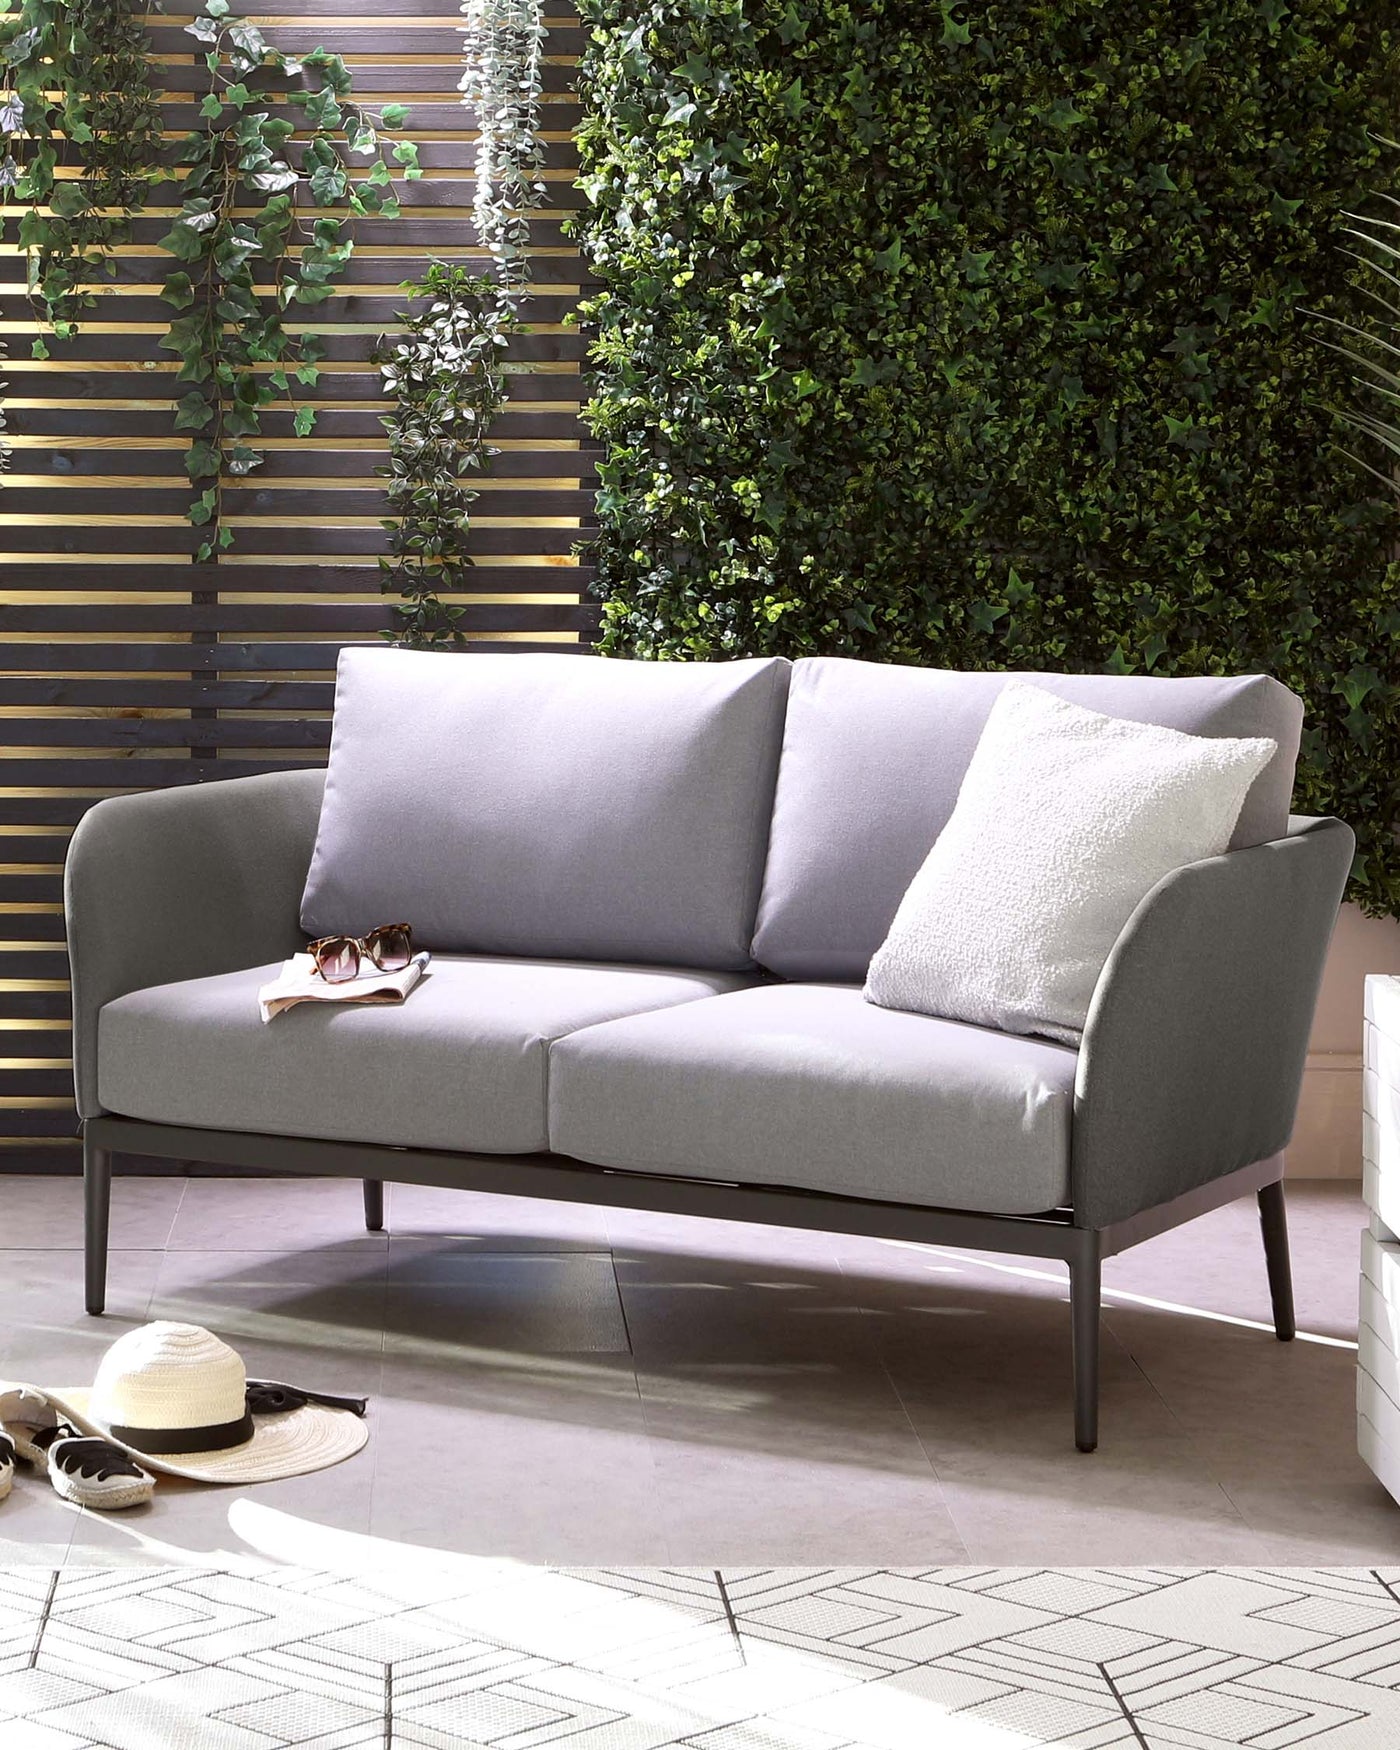 Modern outdoor three-seater sofa with a sleek metal frame and plush grey cushions, accompanied by fluffy white pillows. The piece is accessorized with a pair of sunglasses and a sun hat, evoking a relaxed, chic outdoor living vibe.